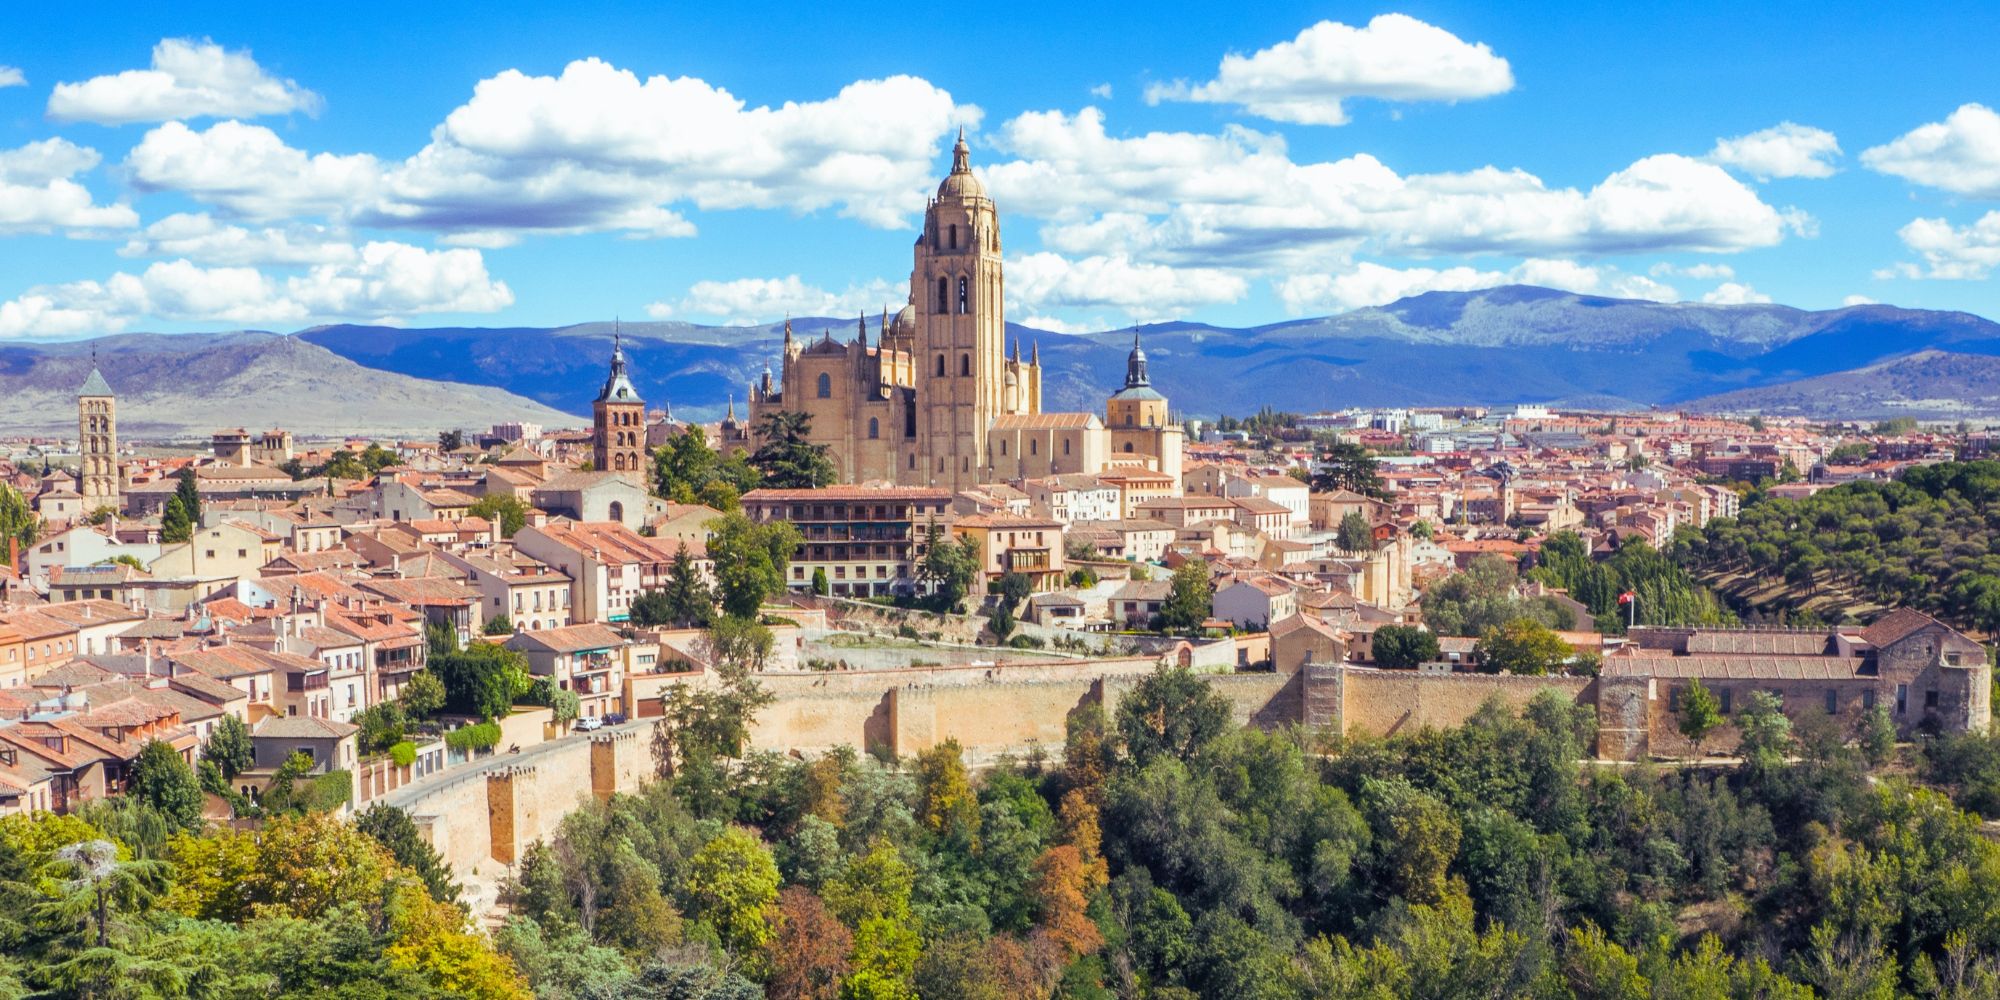 Best Gifts for Someone Going to Segovia